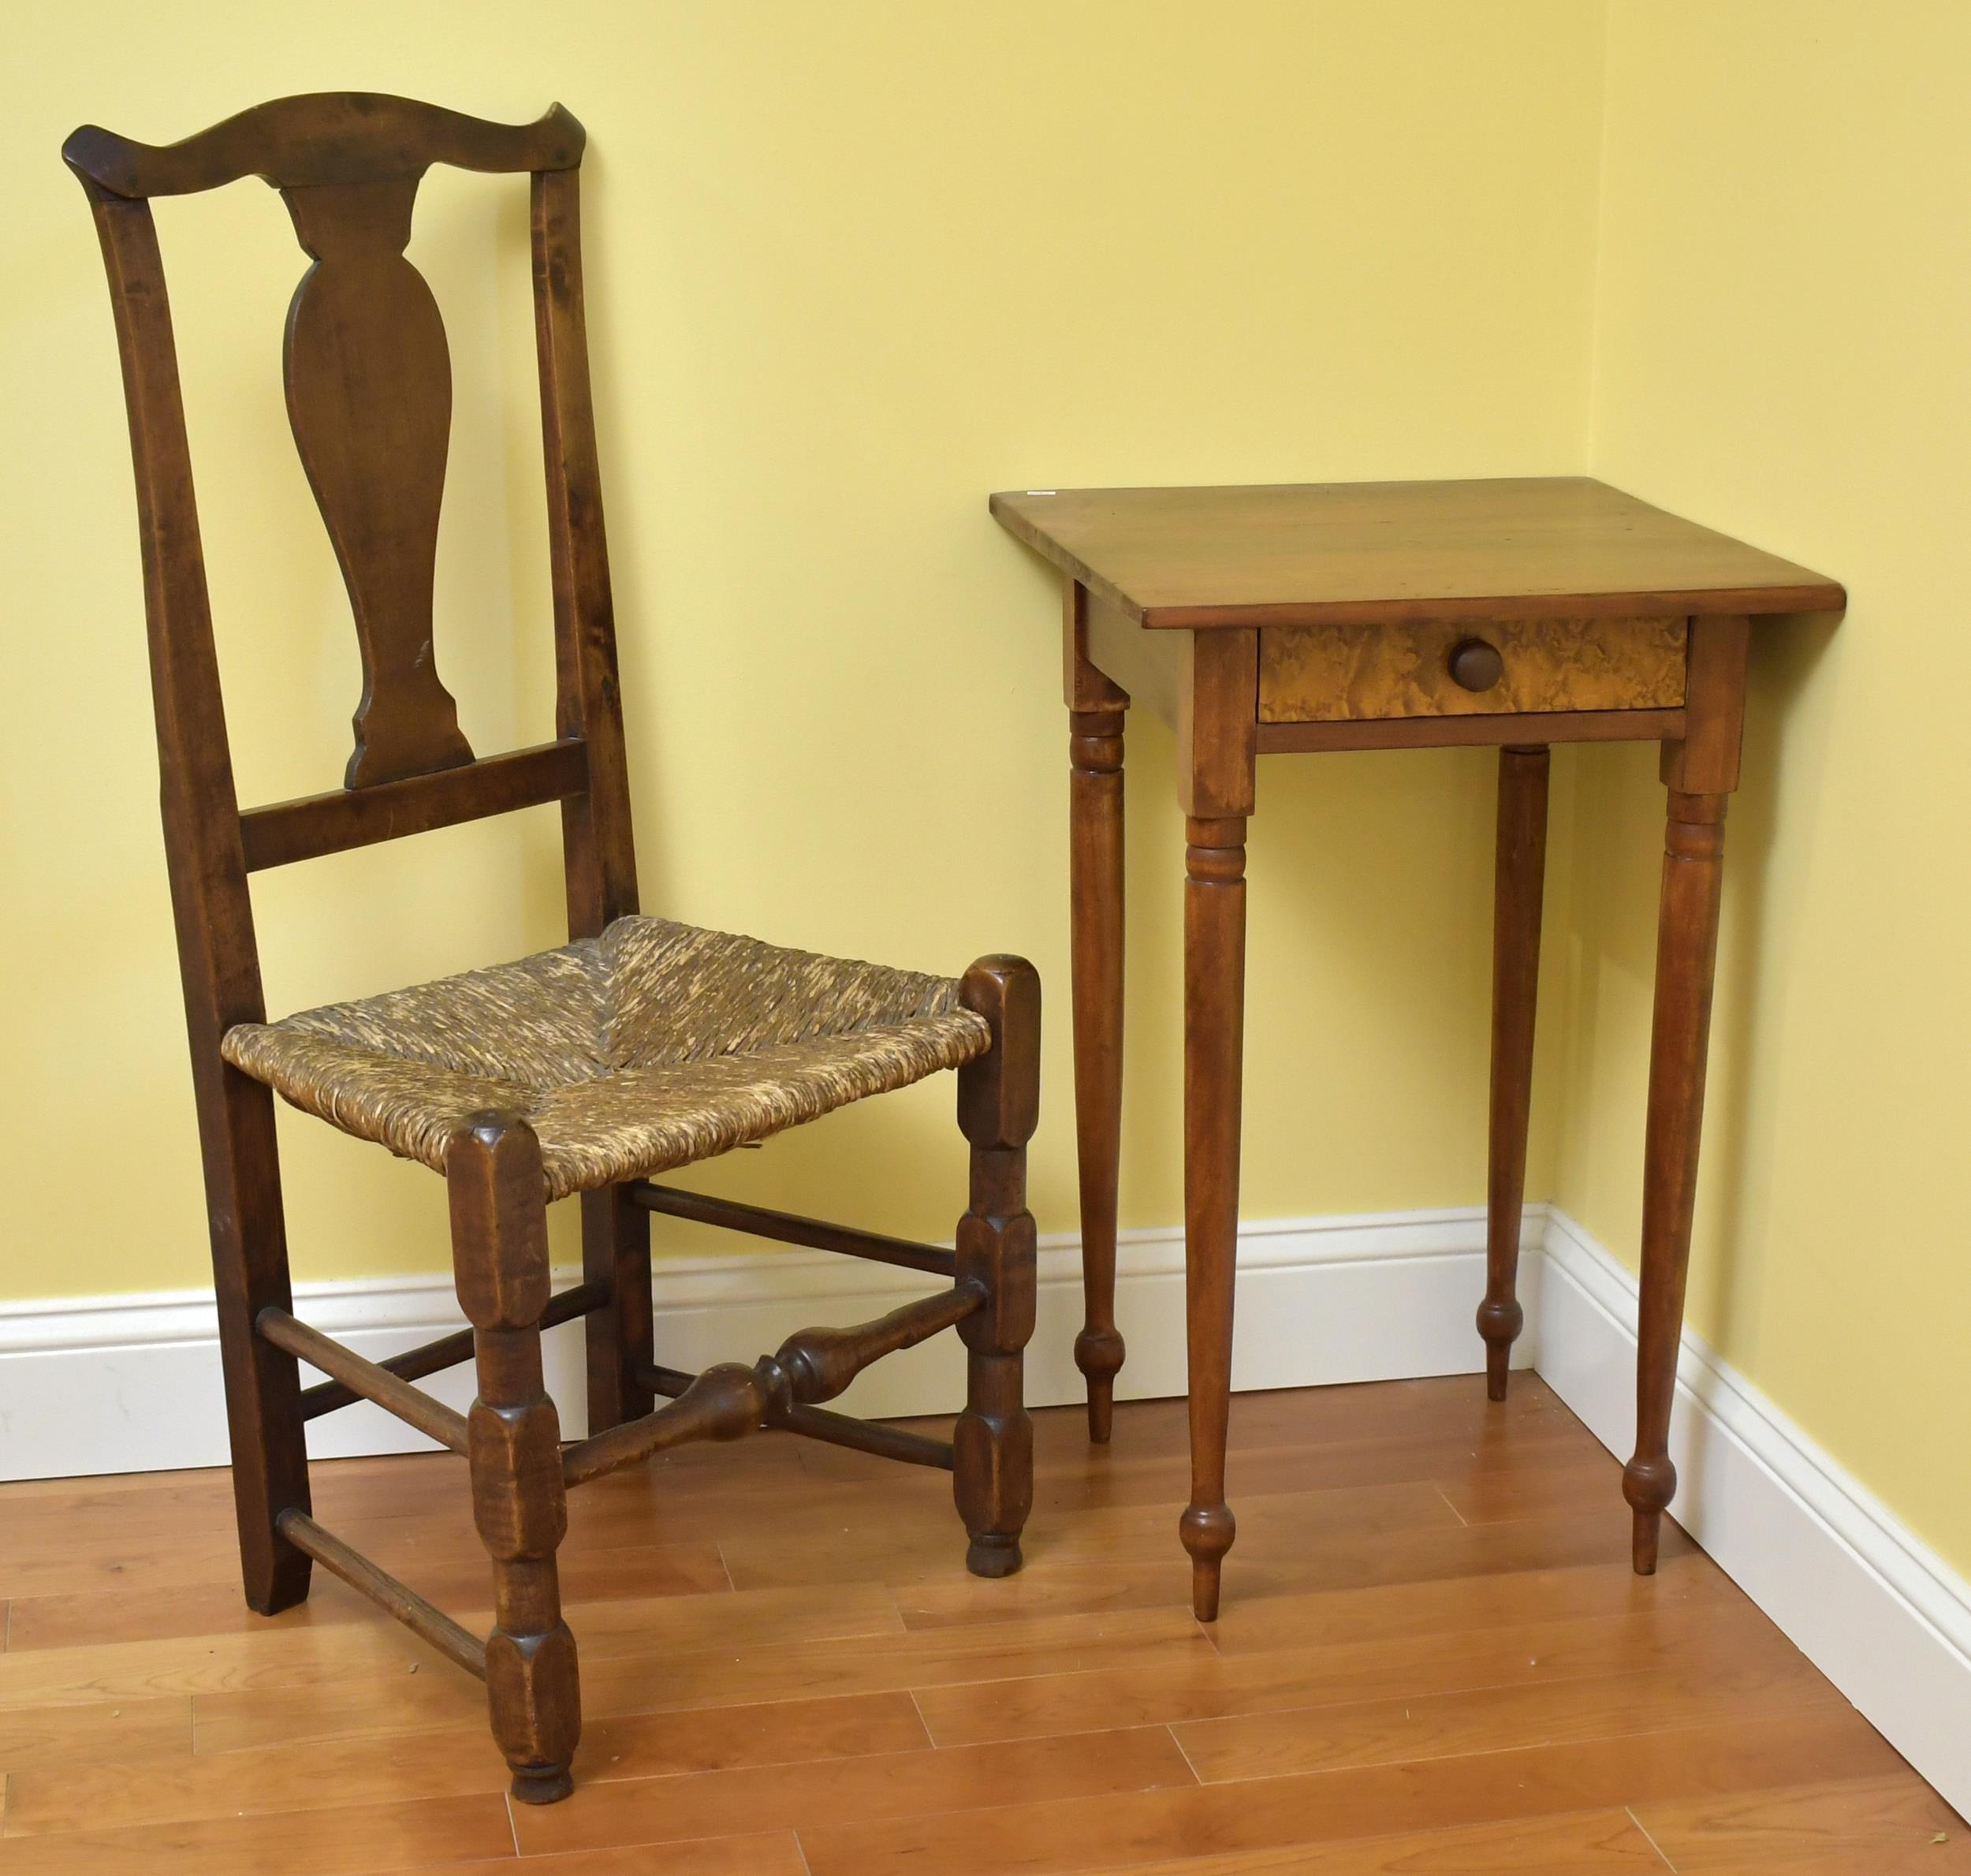 19TH C. STAND AND 18TH C. CHAIR.